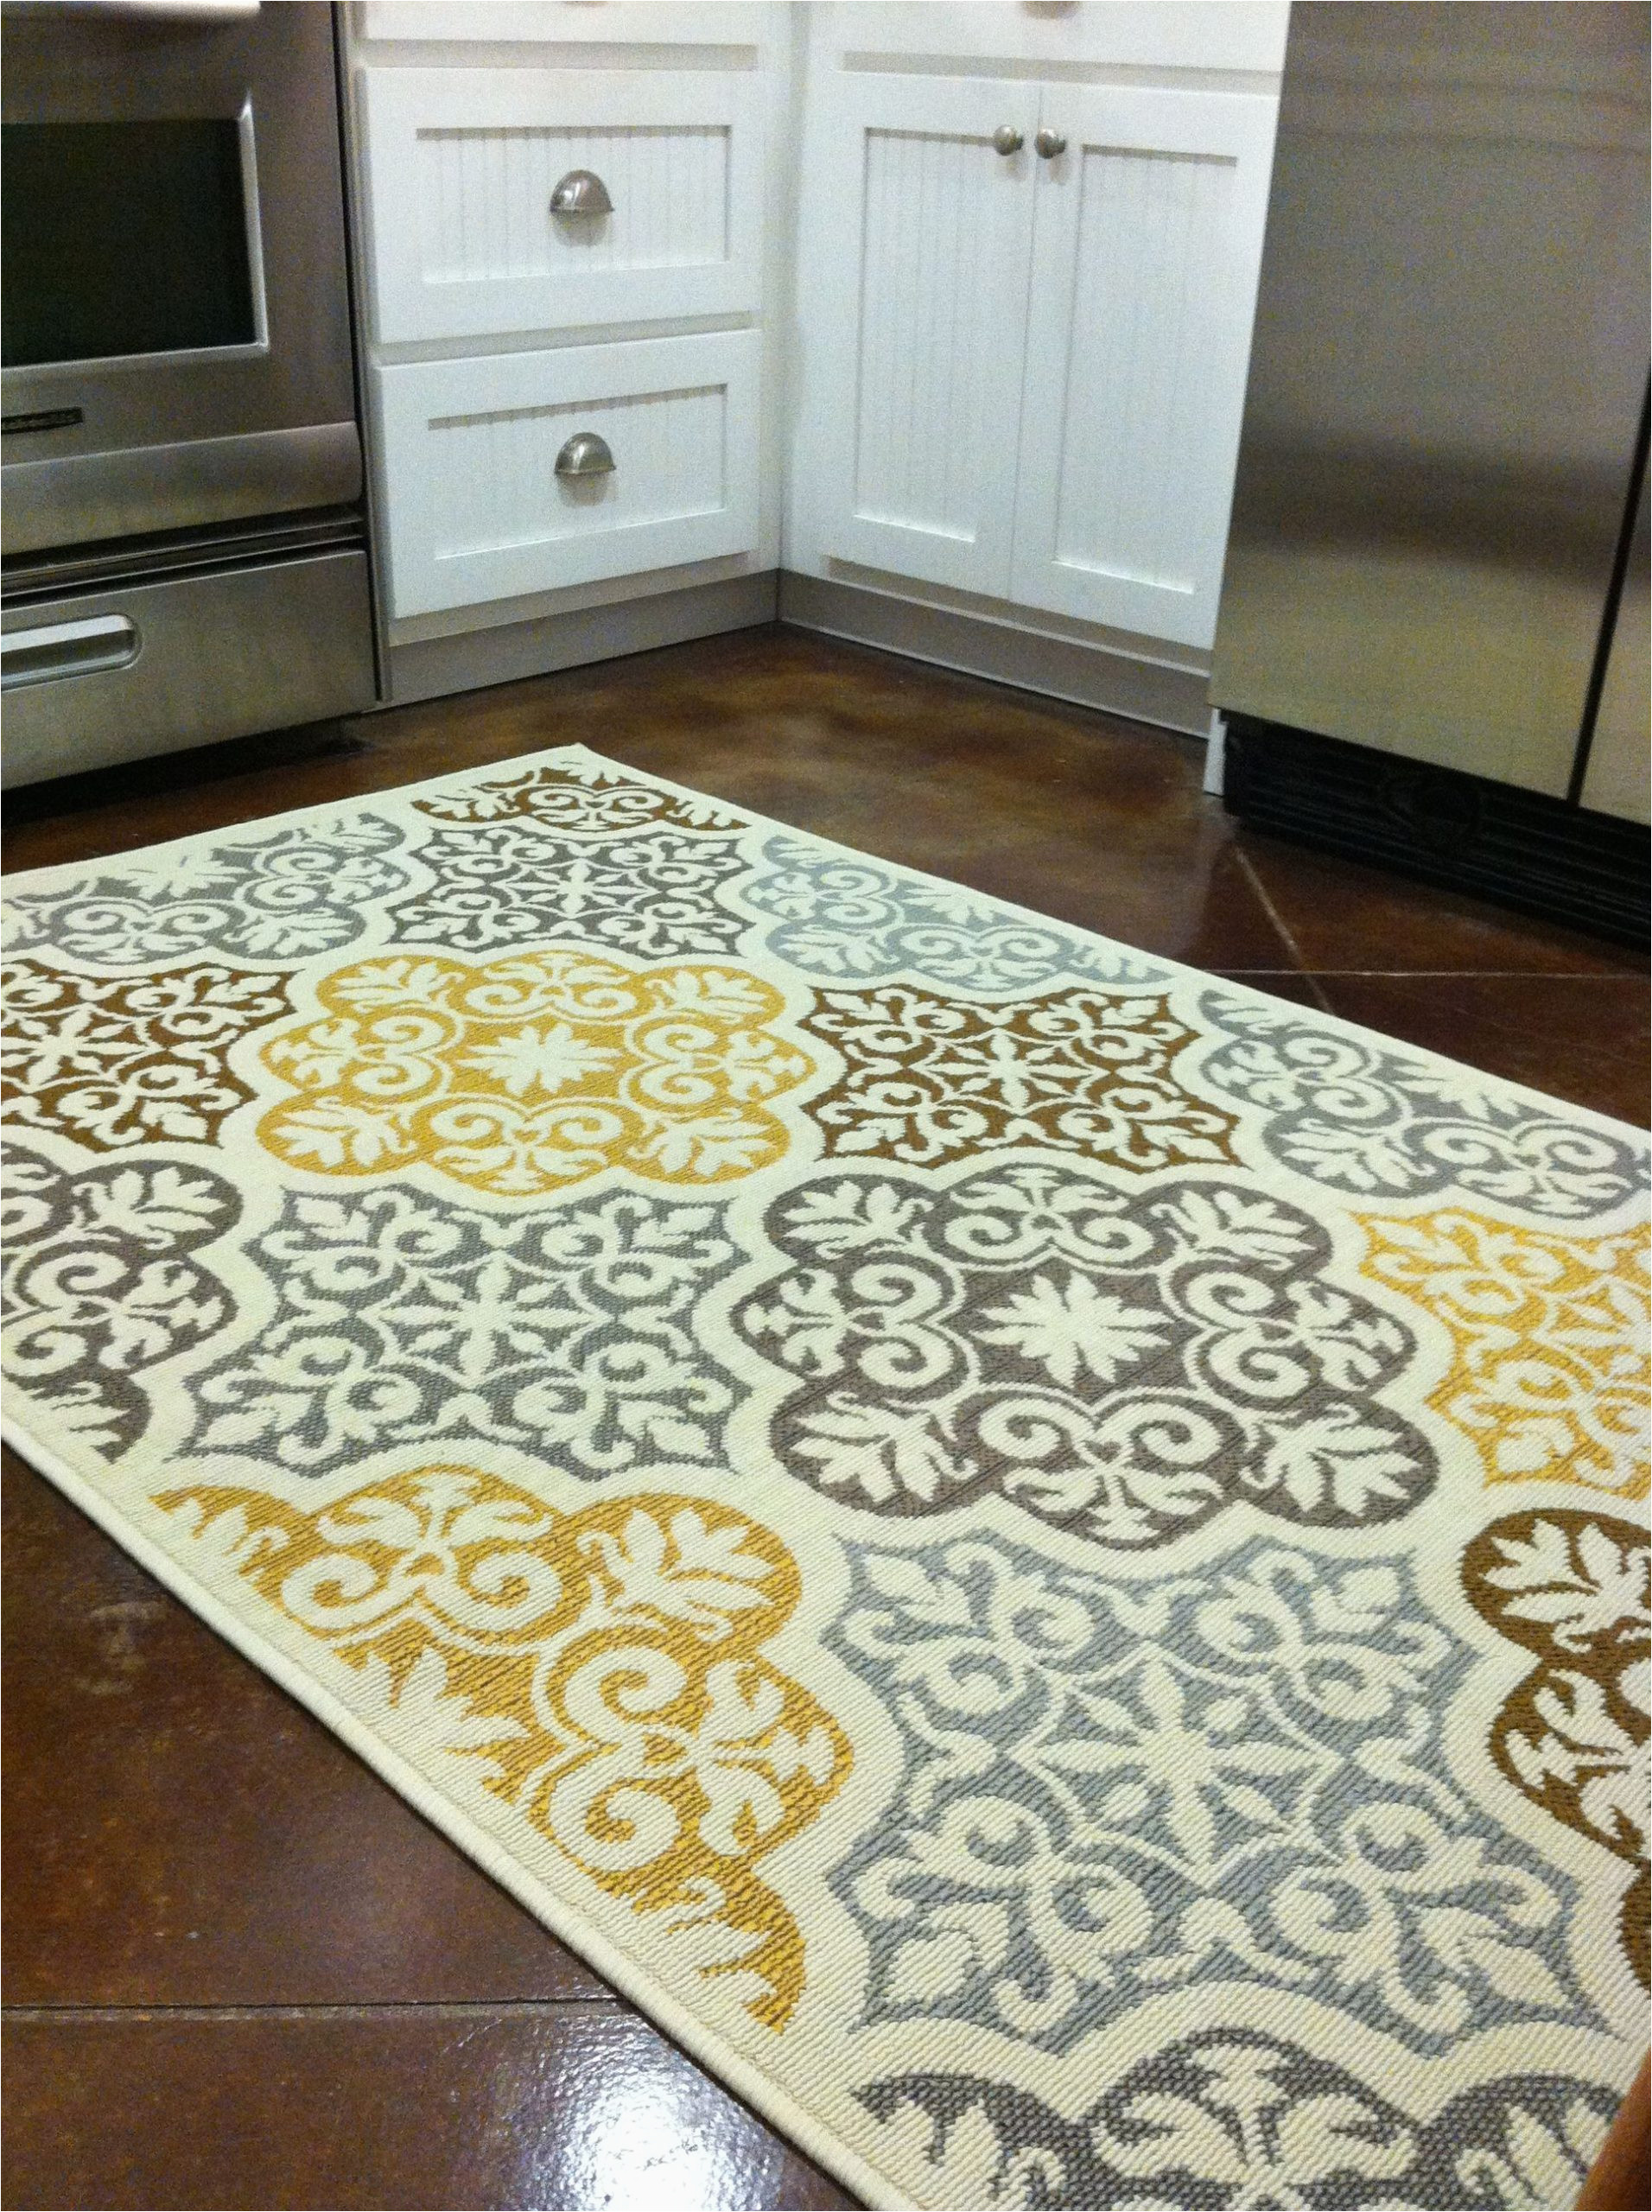 Blue Rugs for Kitchen Kitchen Rug Purchased From Overstock Blue Grey Yellow and